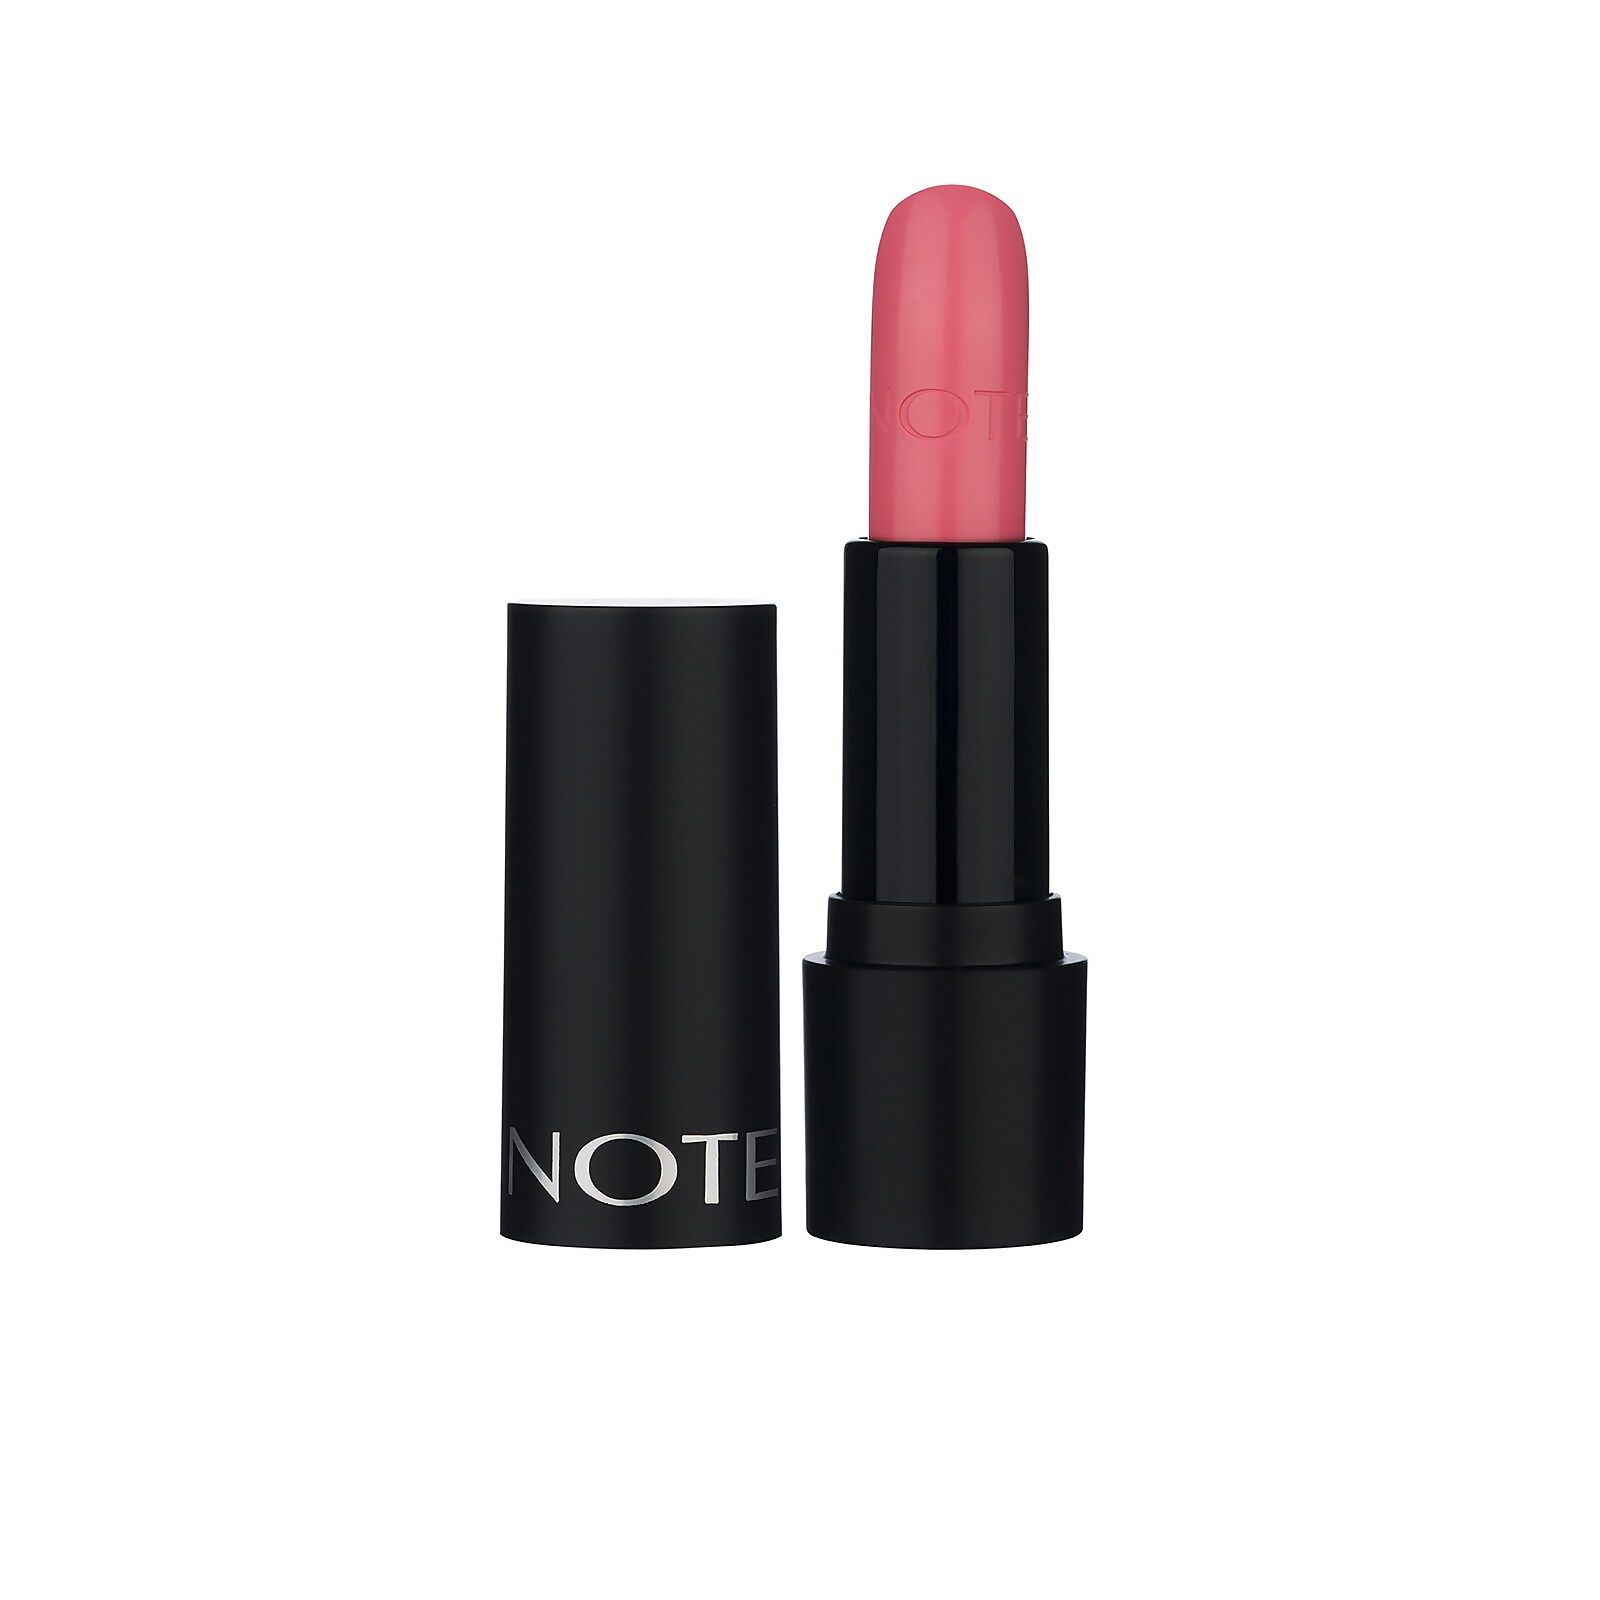 Note Cosmetics Long Wearing Lipstick 4.5g (Various Shades) - 07 Indian Rose